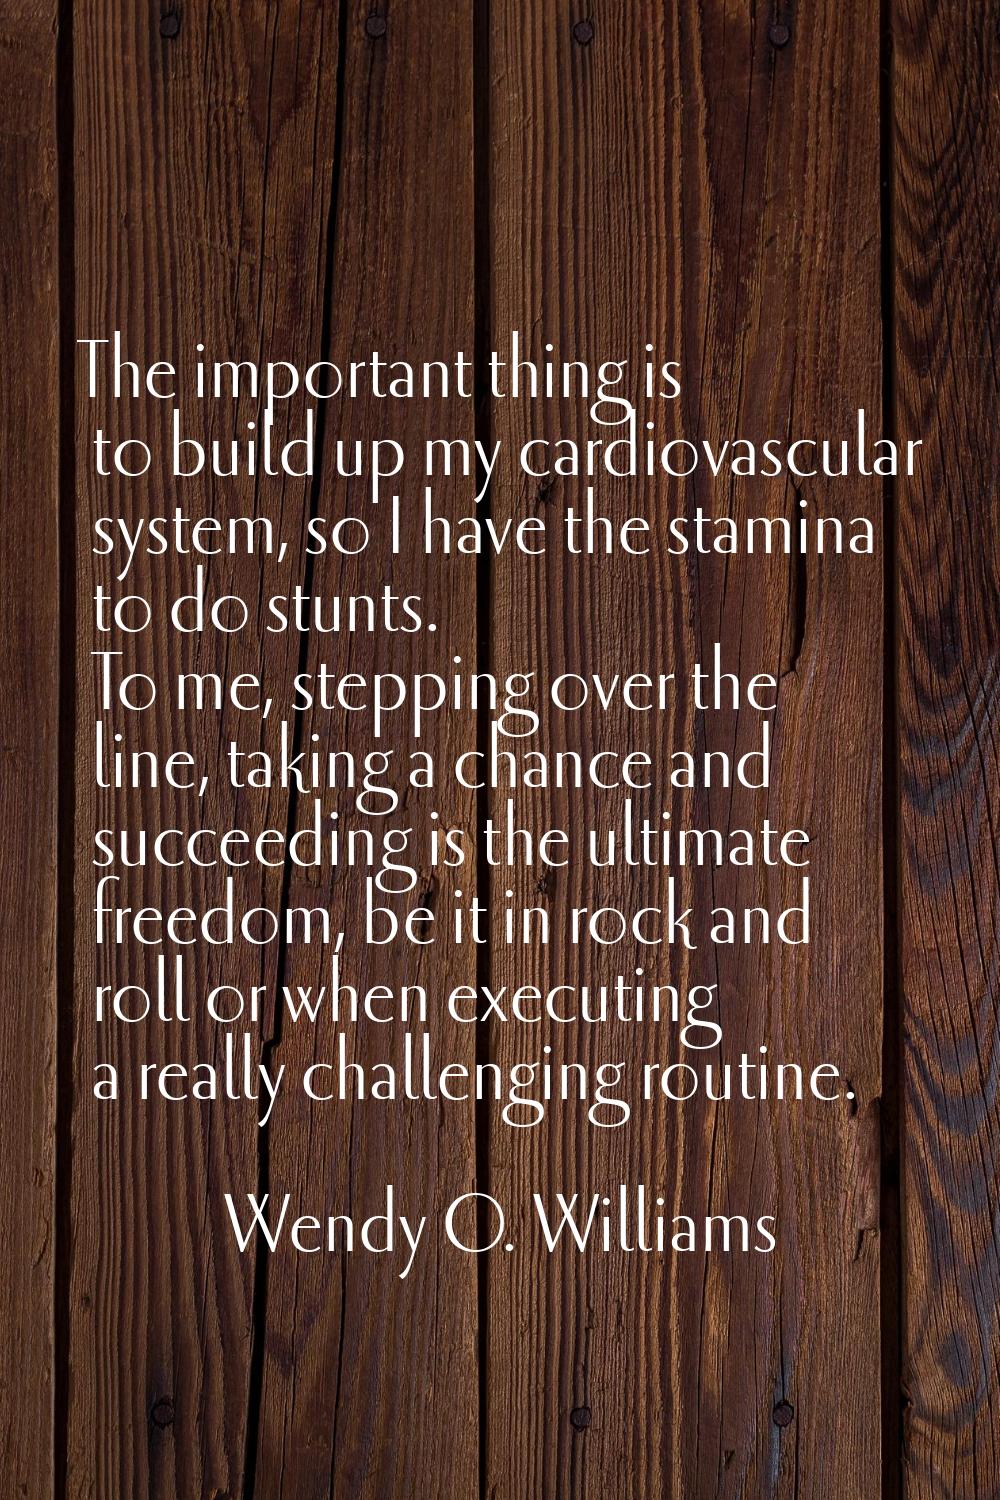 The important thing is to build up my cardiovascular system, so I have the stamina to do stunts. To